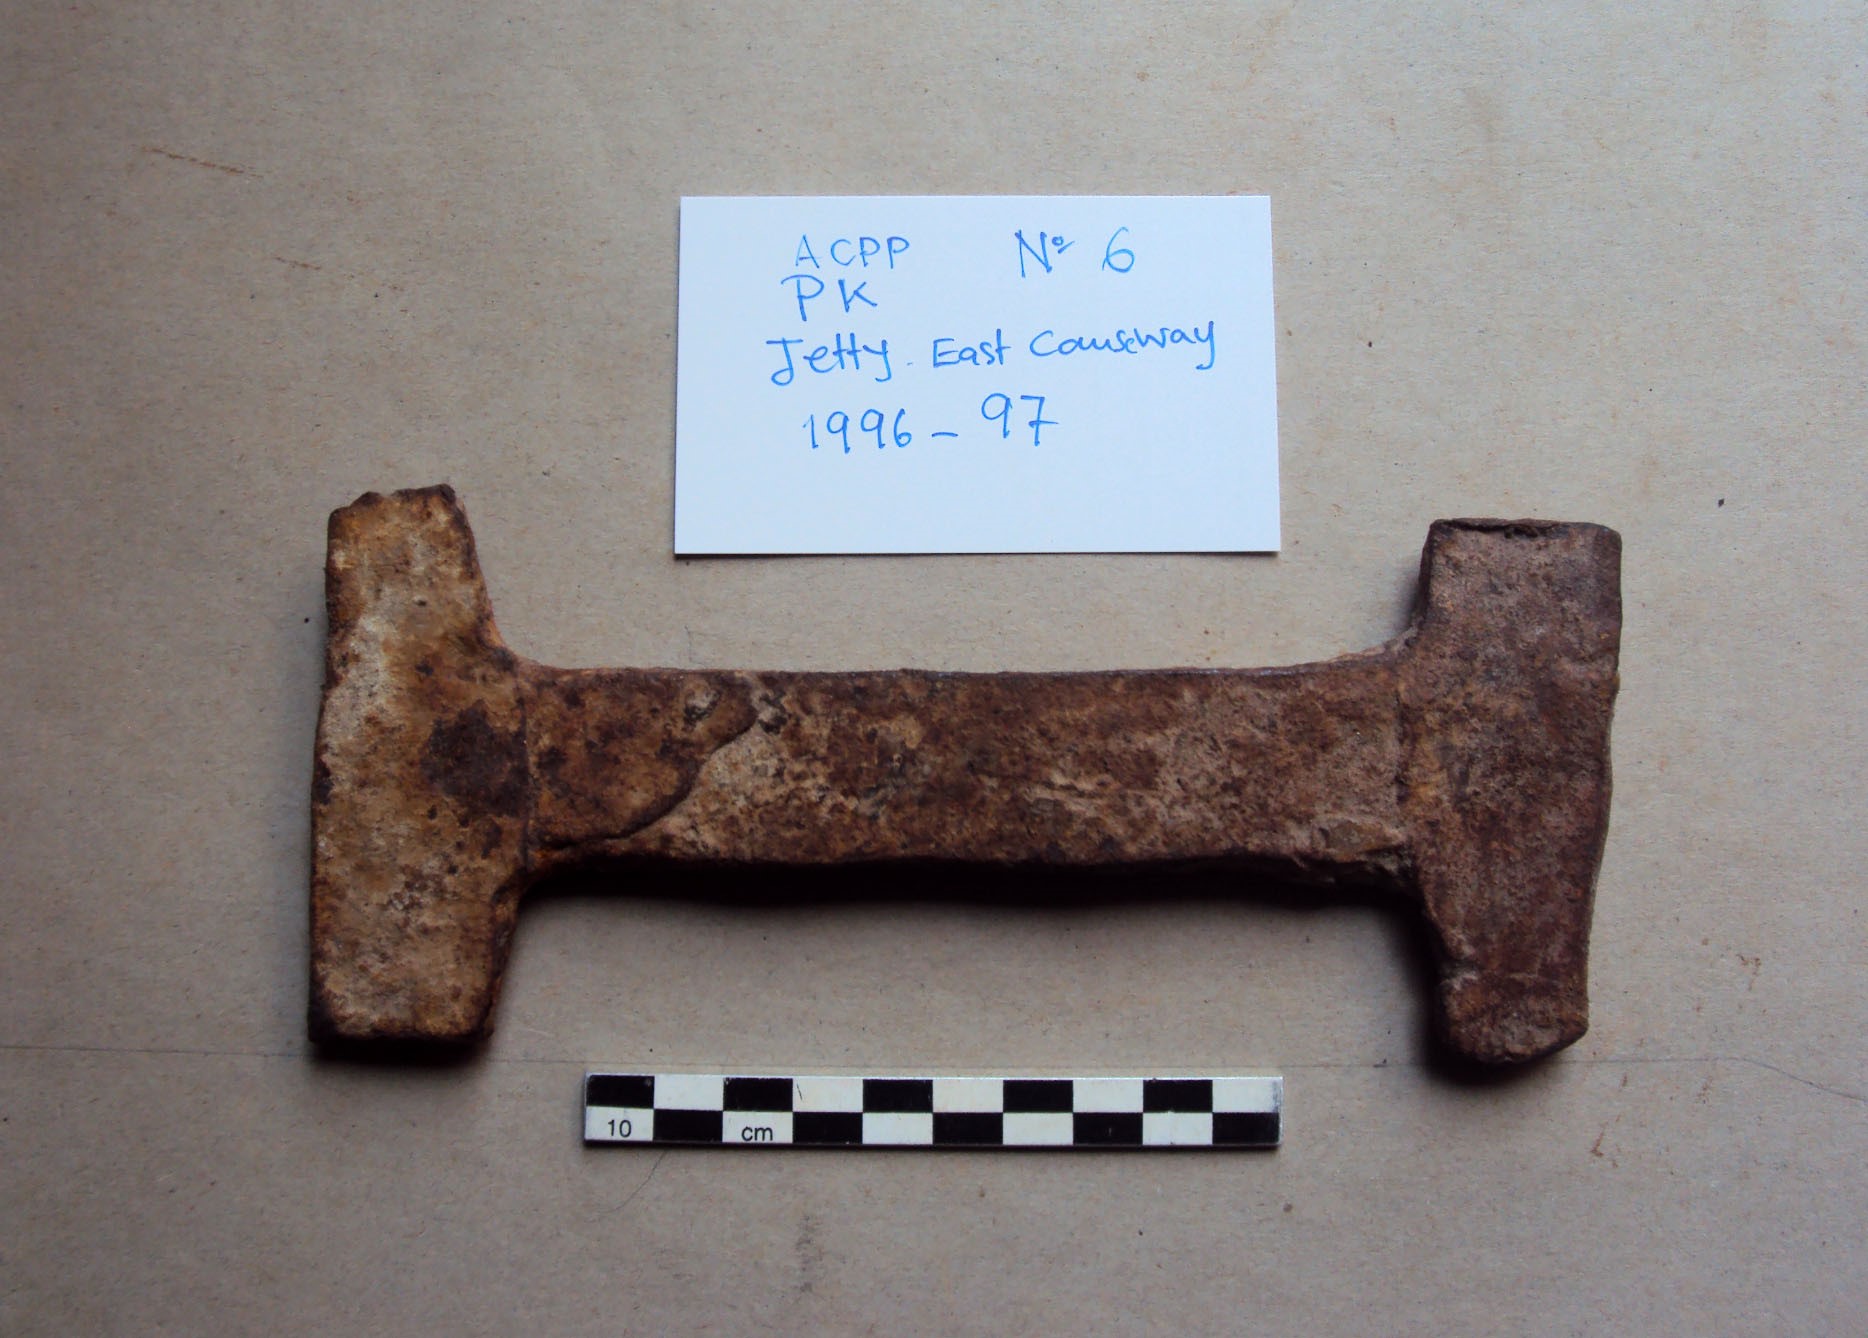 Example of one of the clamps recovered at the Jetty. 